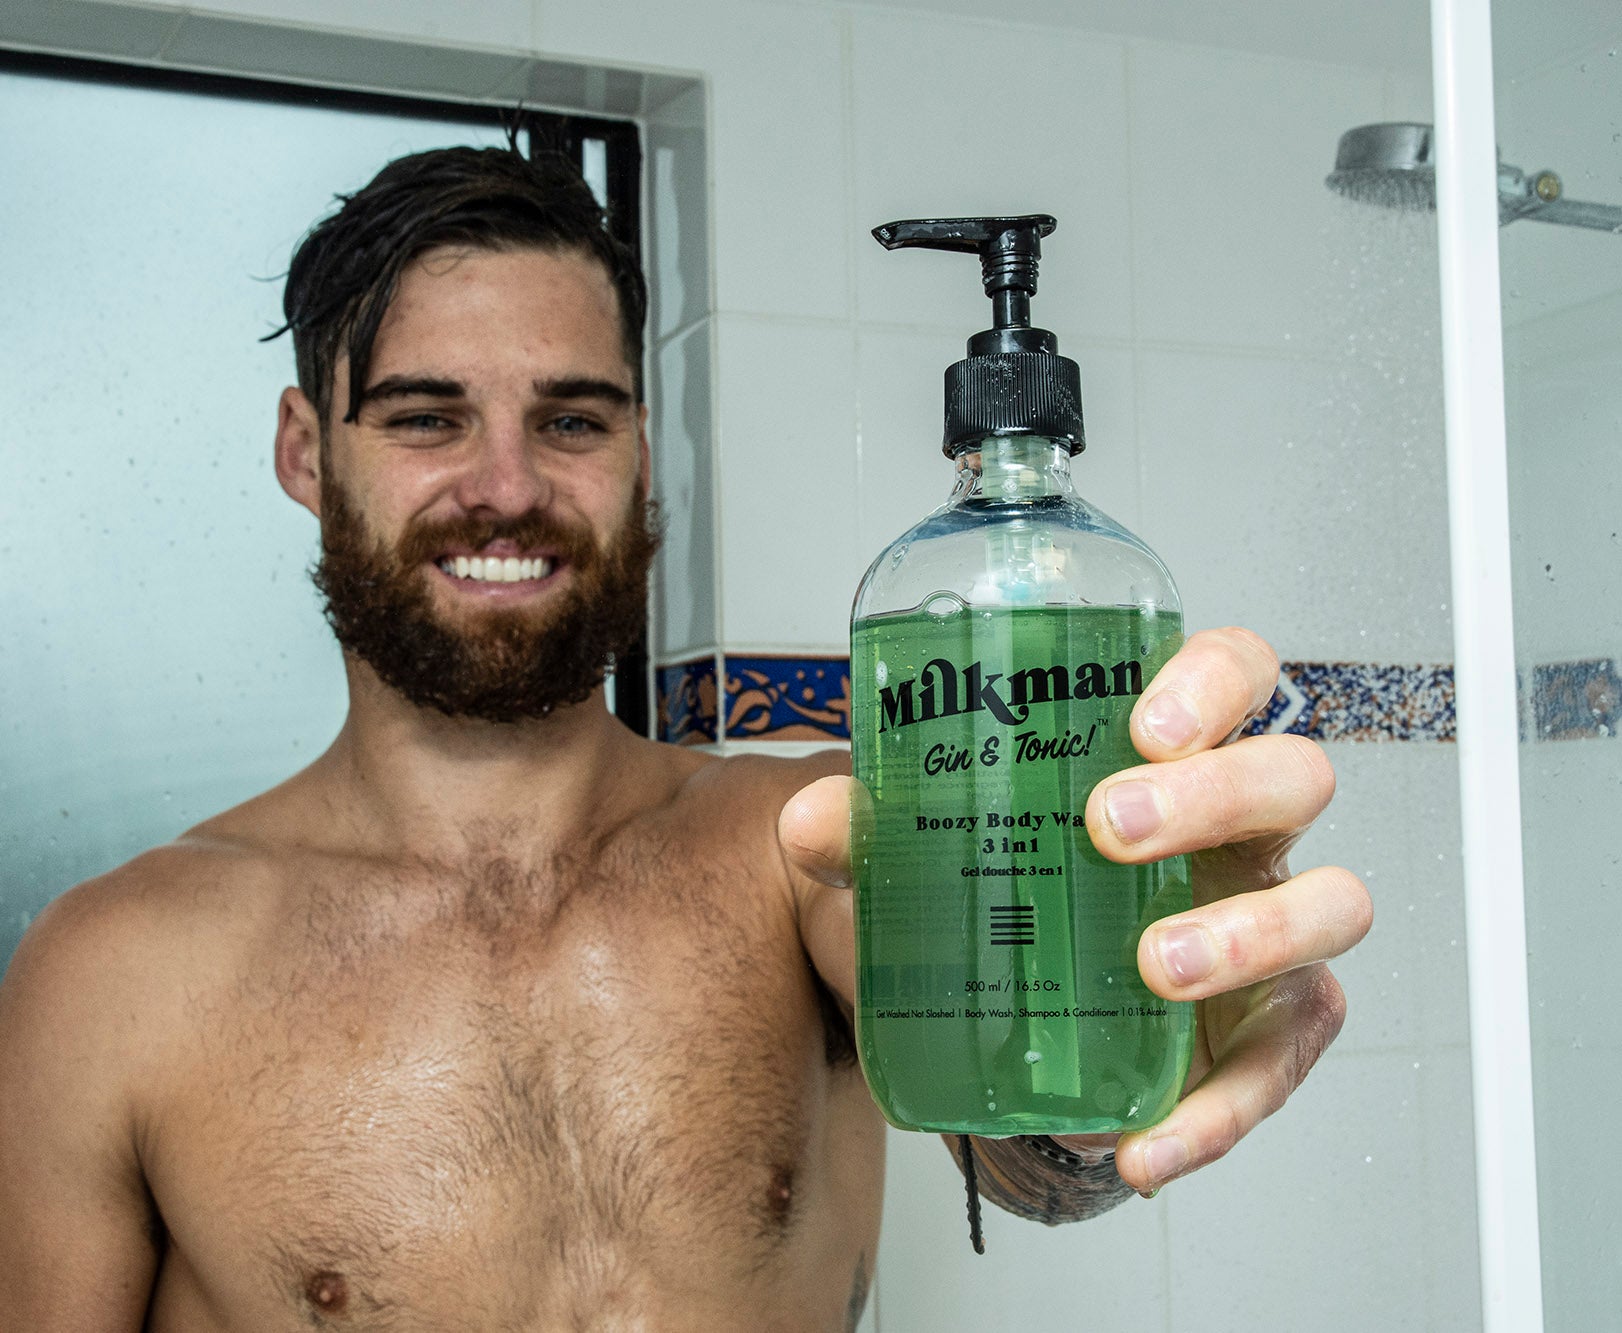 man holding milkman men's body wash with Gin and Tonic scent